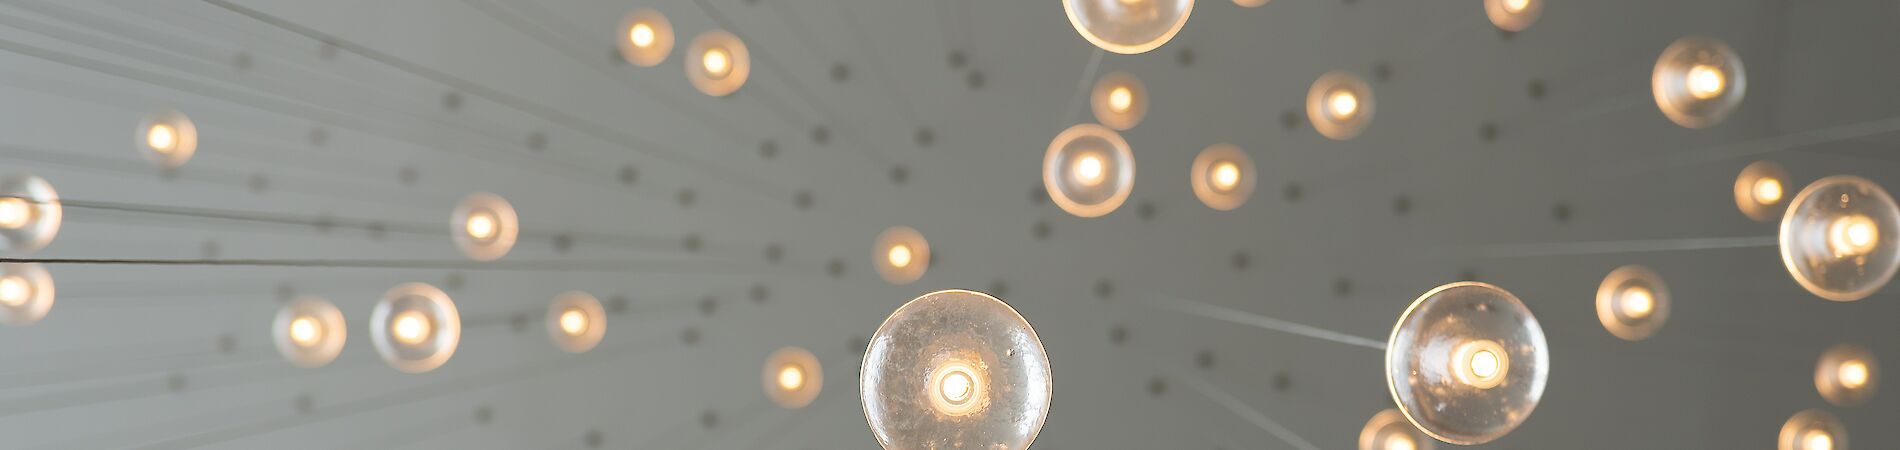 Numerous light bulbs hanging from the ceiling